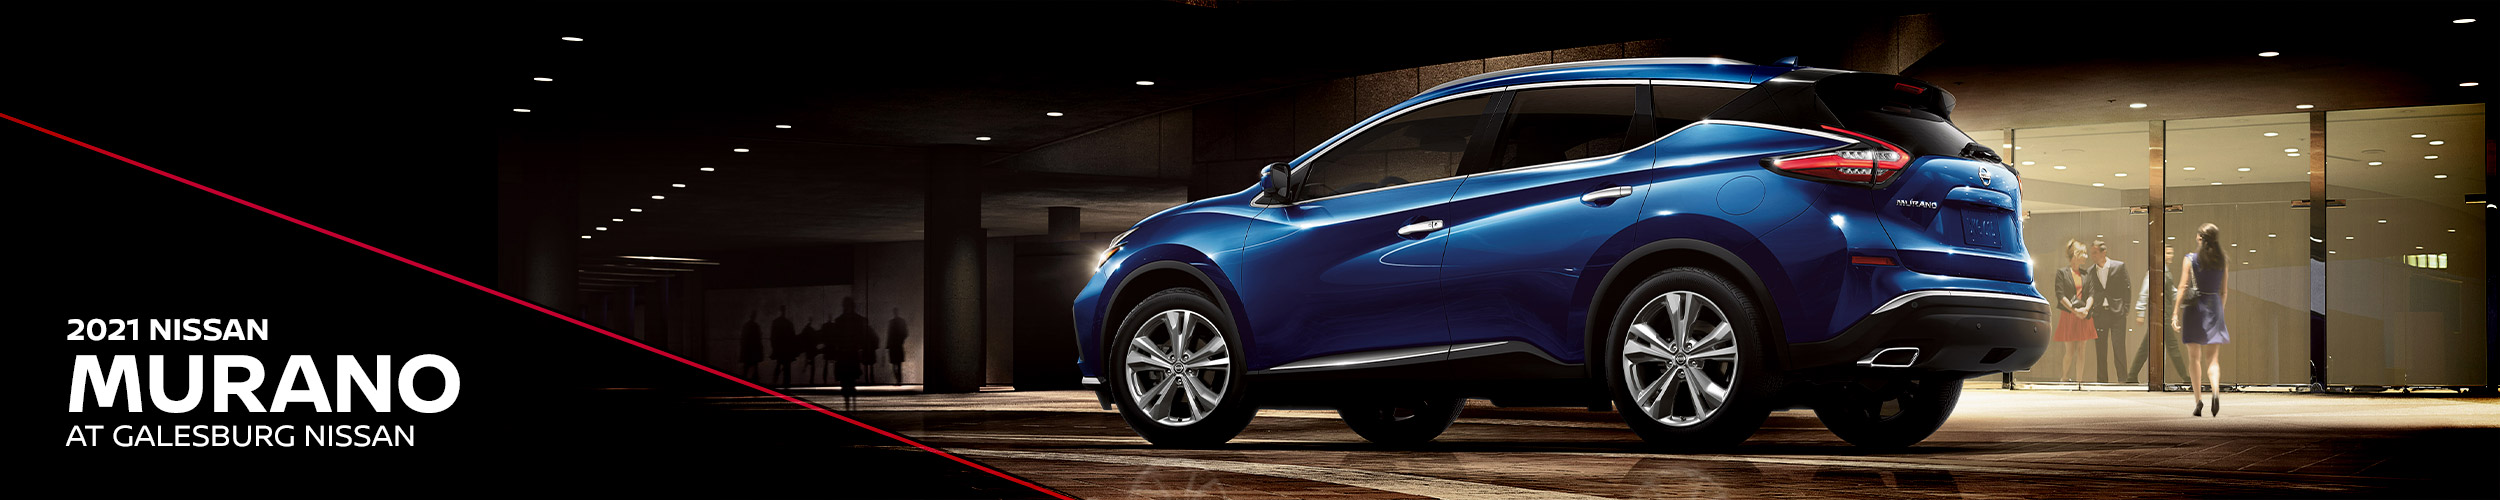 2021 Nissan Murano At Galesburg Nissan in Galesburg, IL